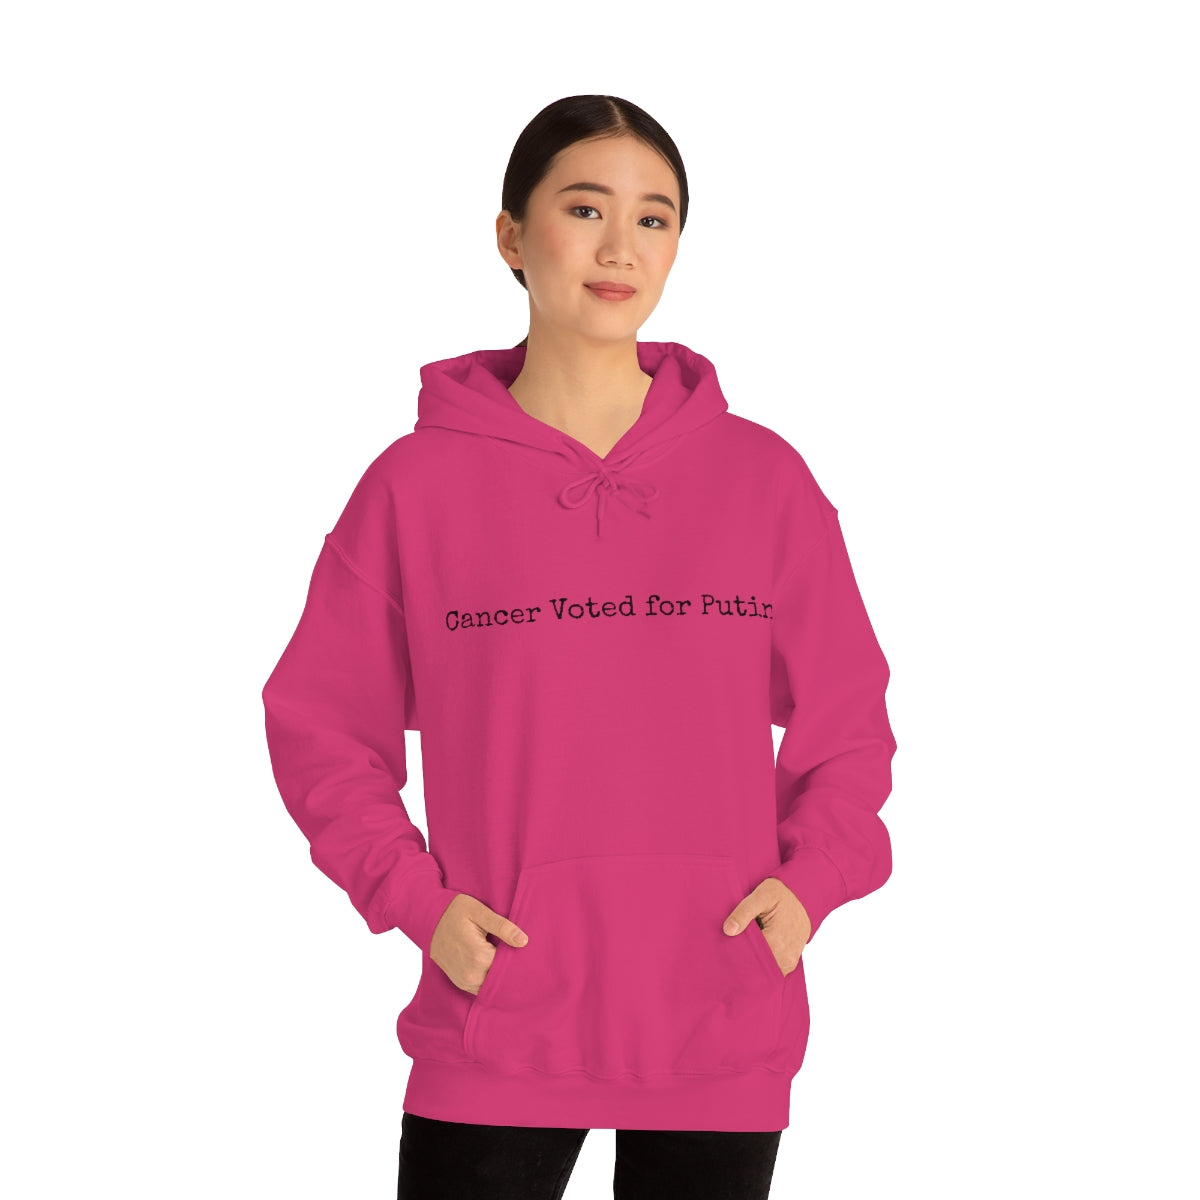 Unisex Heavy Blend™ Hooded Sweatshirt Mens Womens Apparel Clothing Anti Cancer Cancer is Dumb Survivor Support Humorous Funny